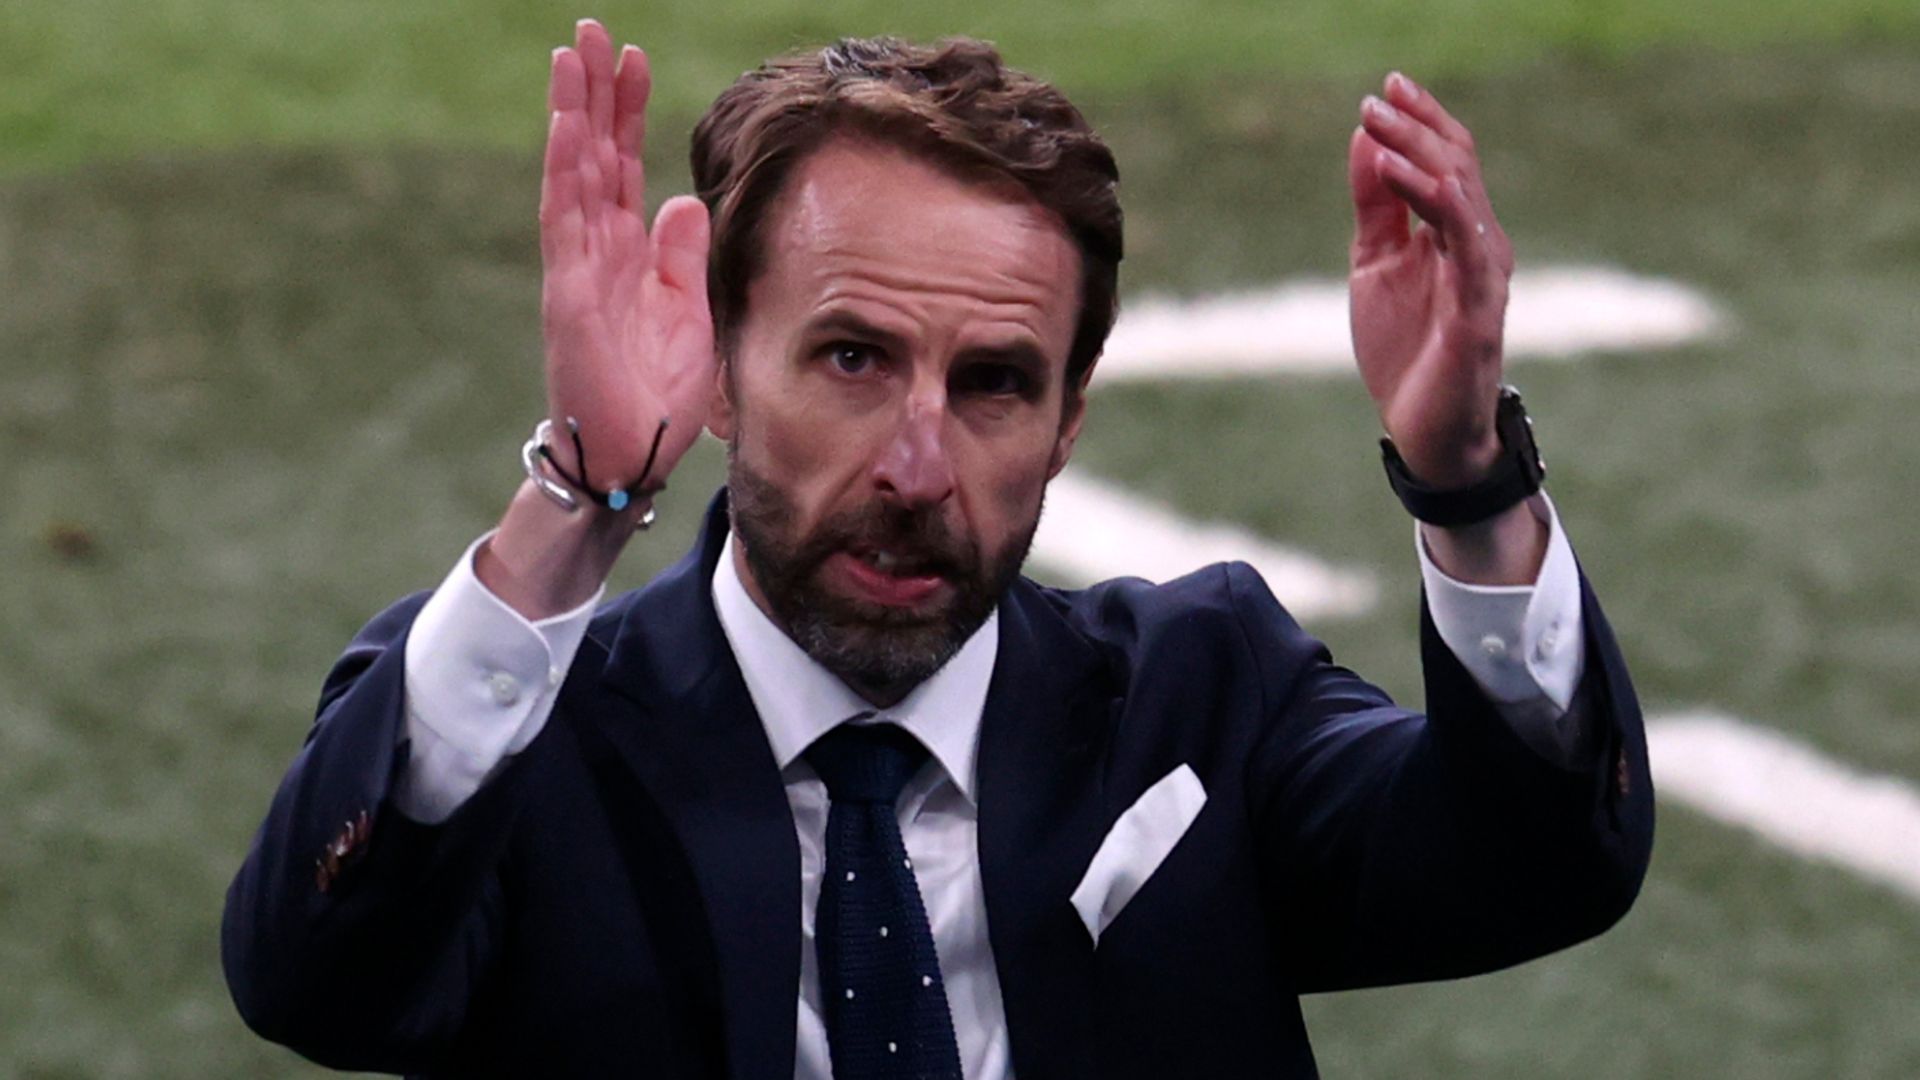 Southgate: It's time for England to bring trophy home